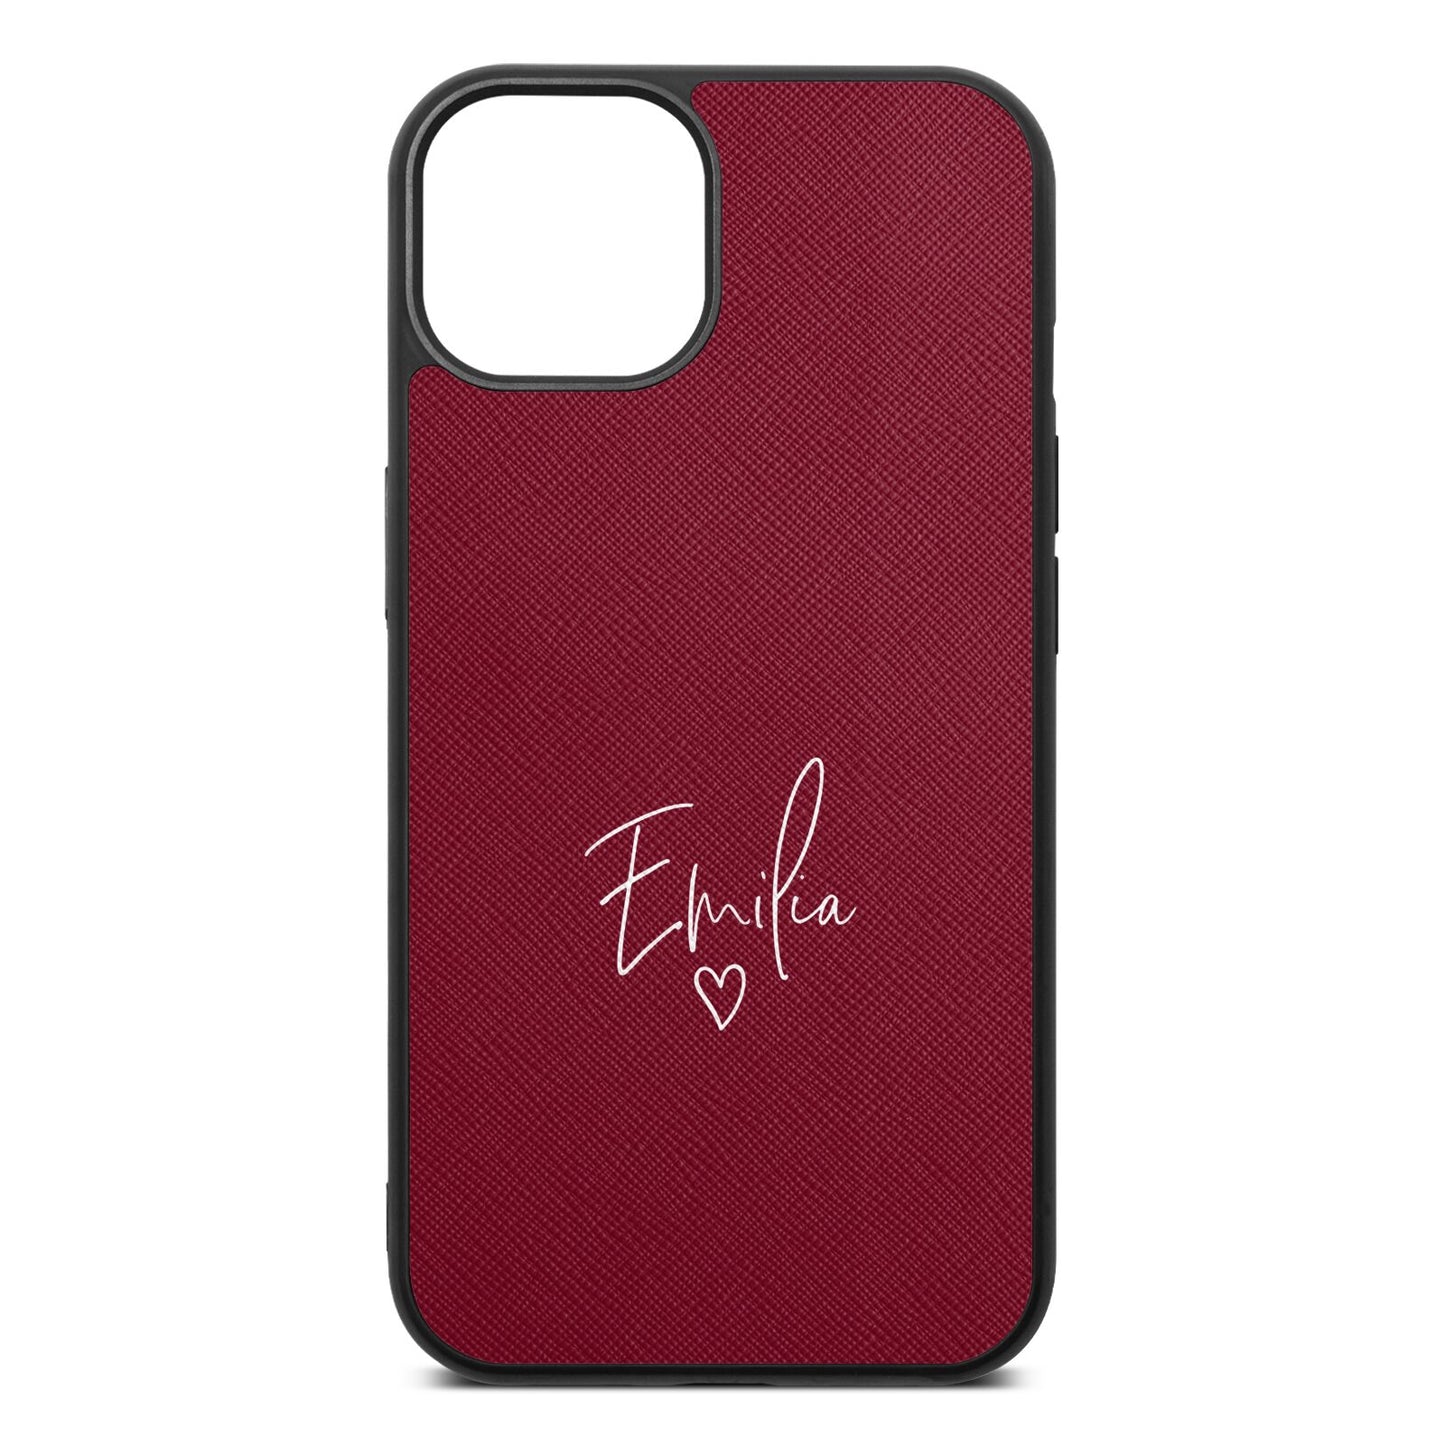 White Handwritten Name Transparent Wine Red Saffiano Leather iPhone 13 Case